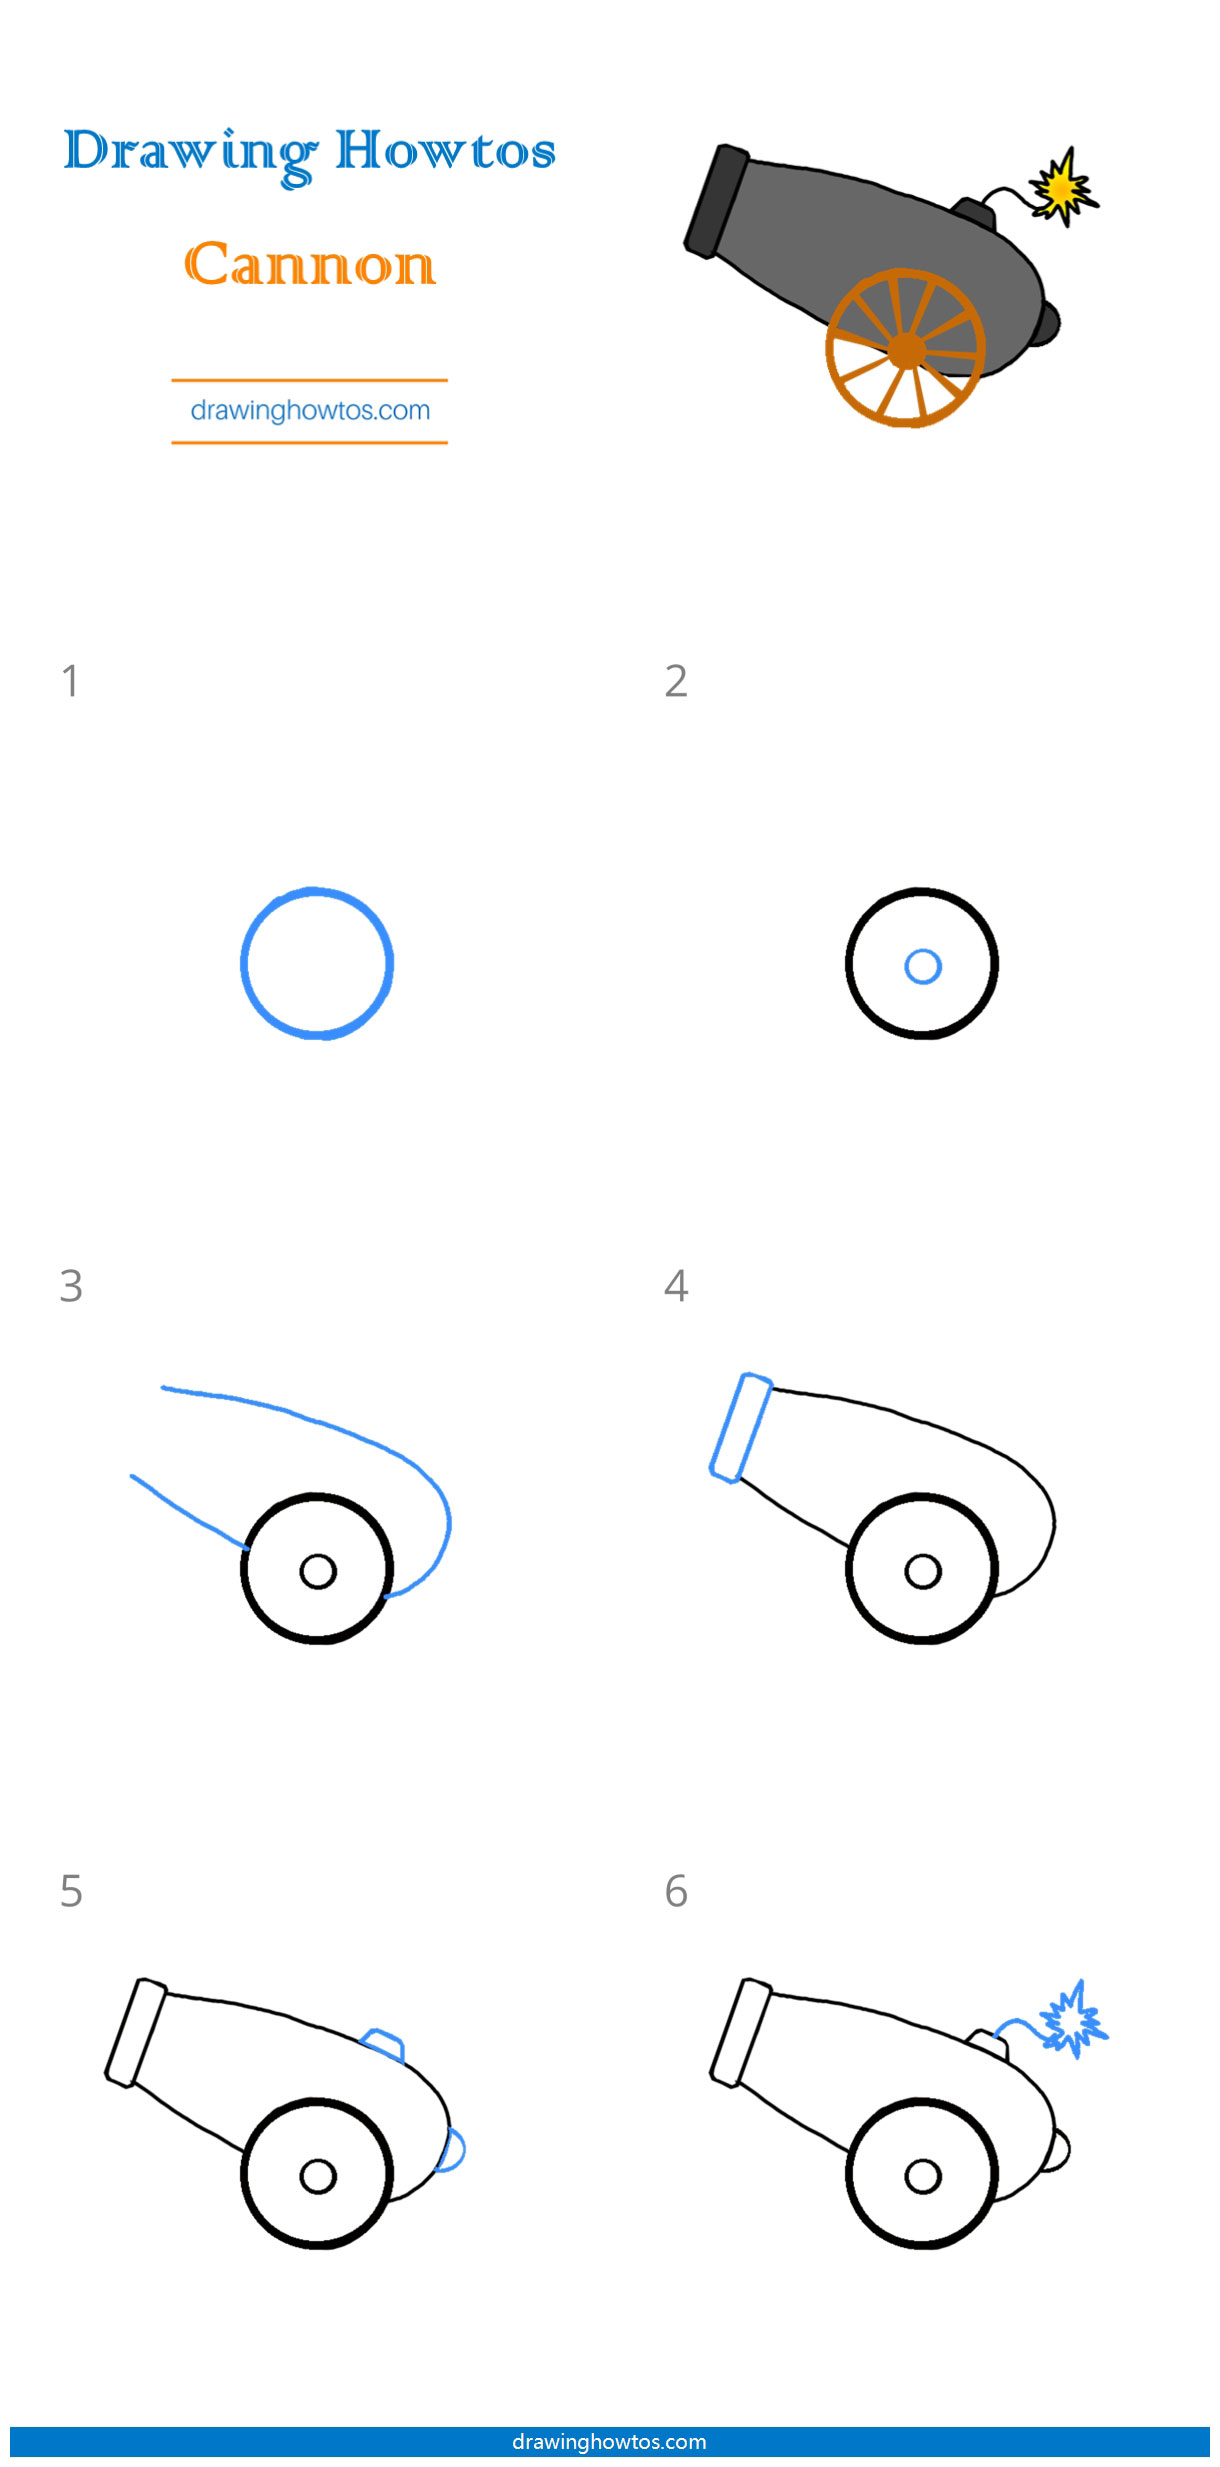 How to Draw a Cannon Step by Step Easy Drawing Guides Drawing Howtos